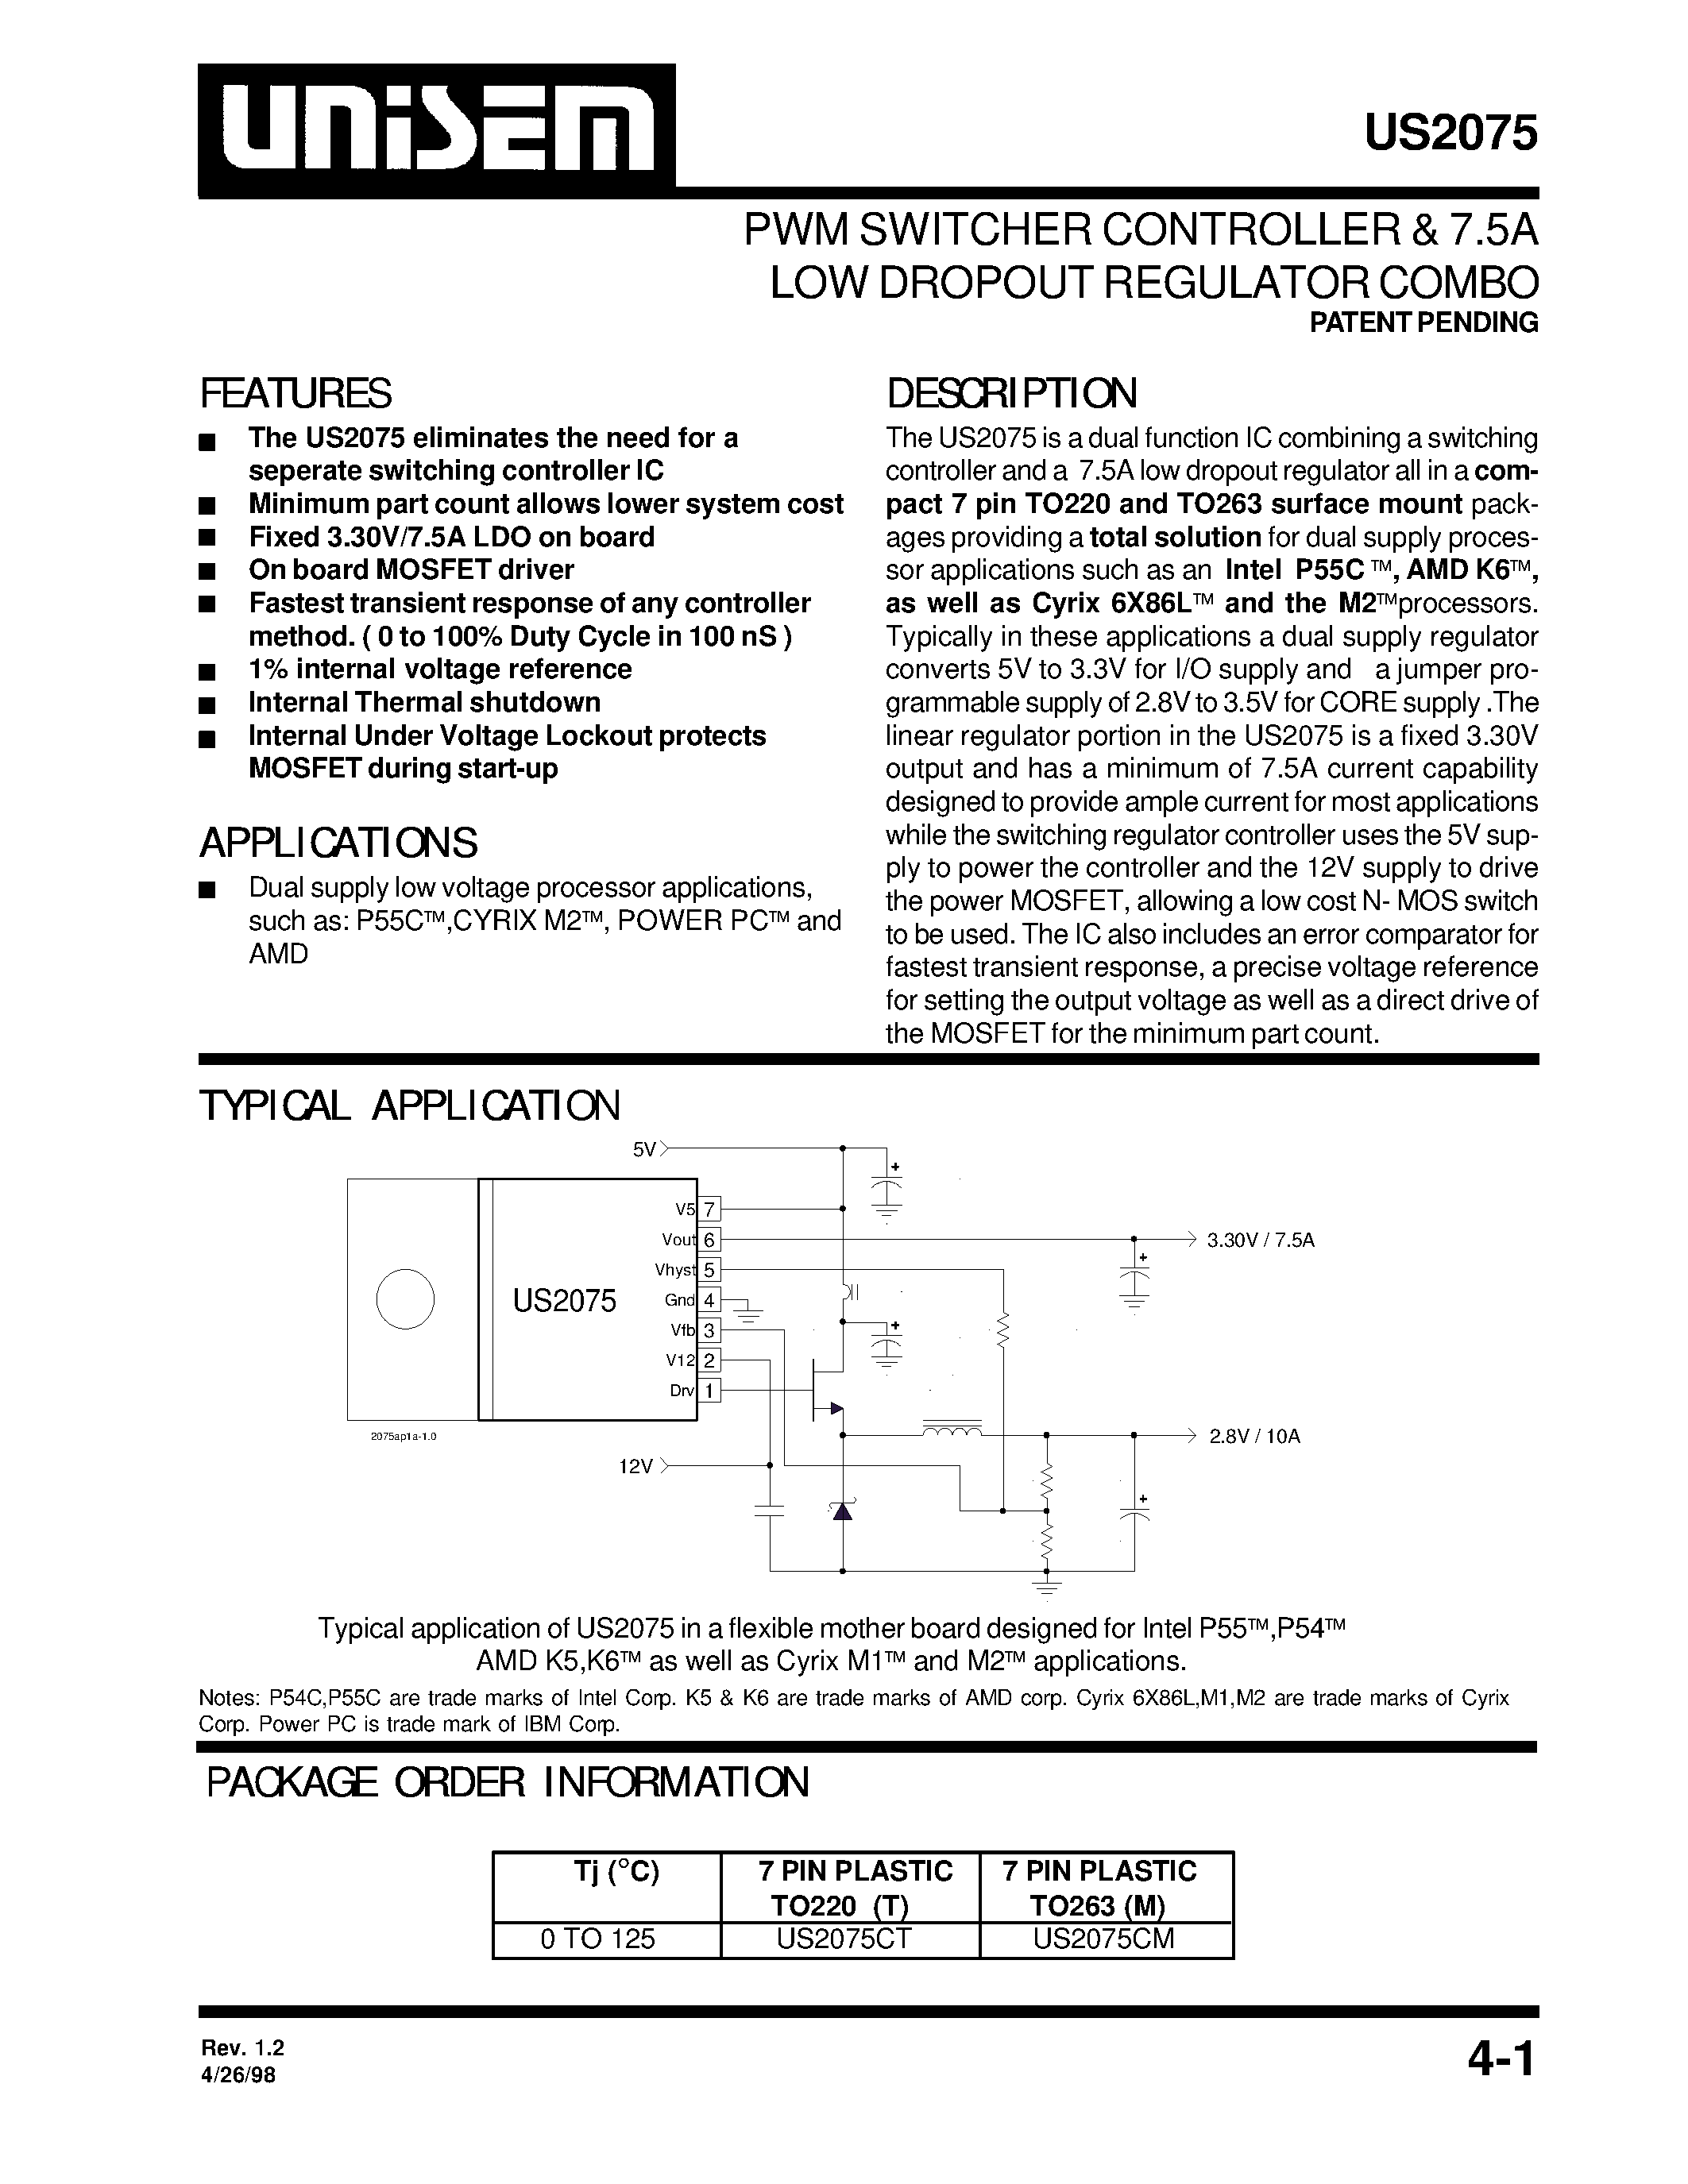 Datasheet US2075CT - PWM SWITCHER CONTROLLER & 7.5A LOW DROPOUT REGULATOR COMBO page 1